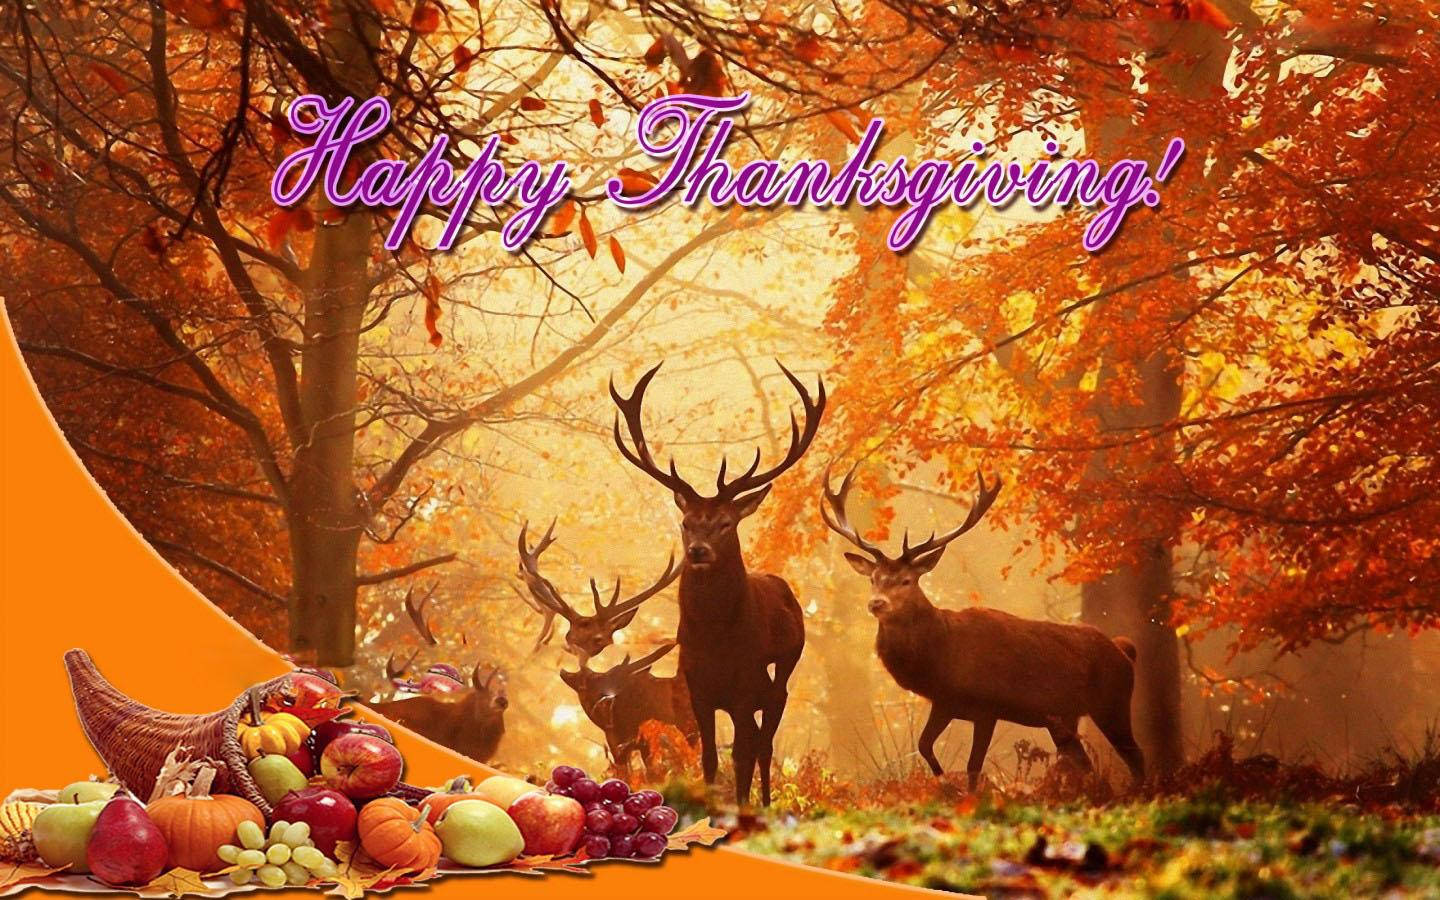 “a Magical Thanksgiving Day In The Forest” Wallpaper